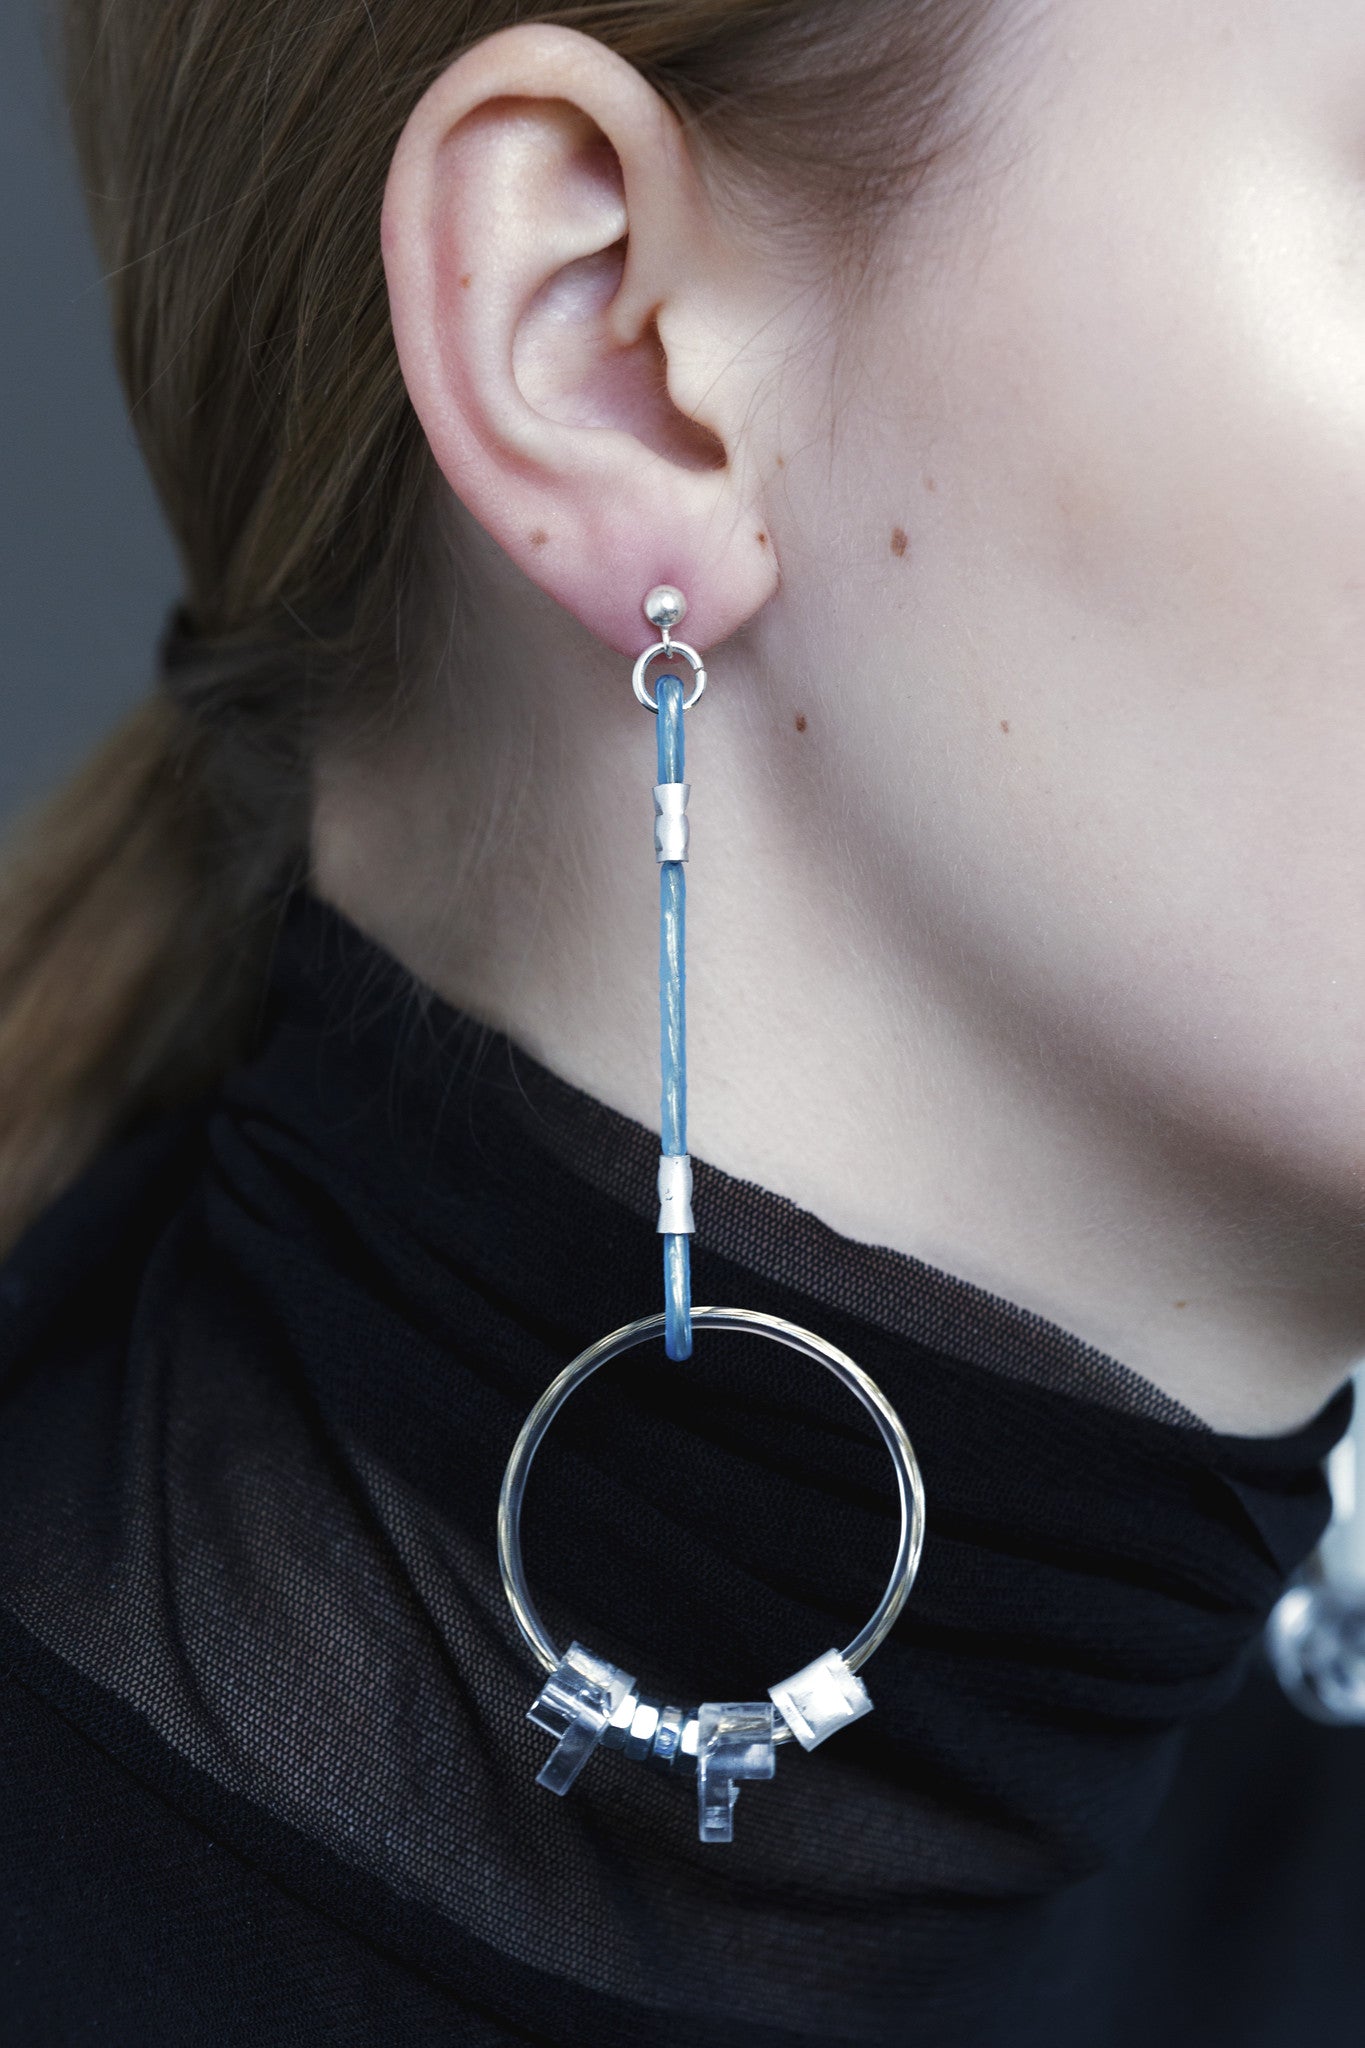 earrings with metal details and silver pins